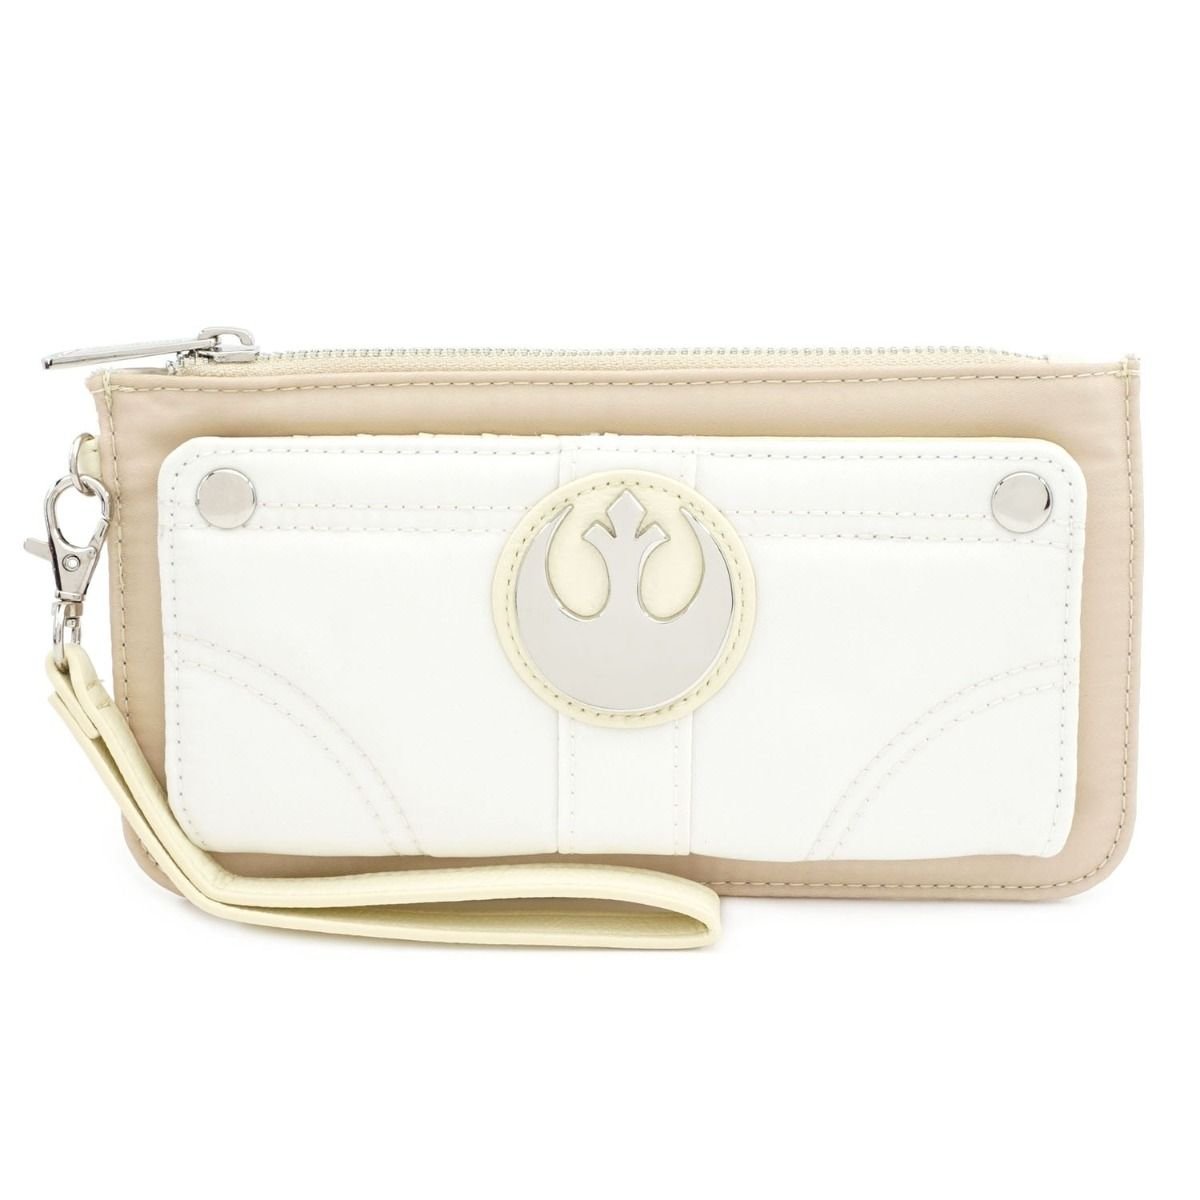 Loungefly x Star Wars Princess Leia Flap Wallet - FRONT